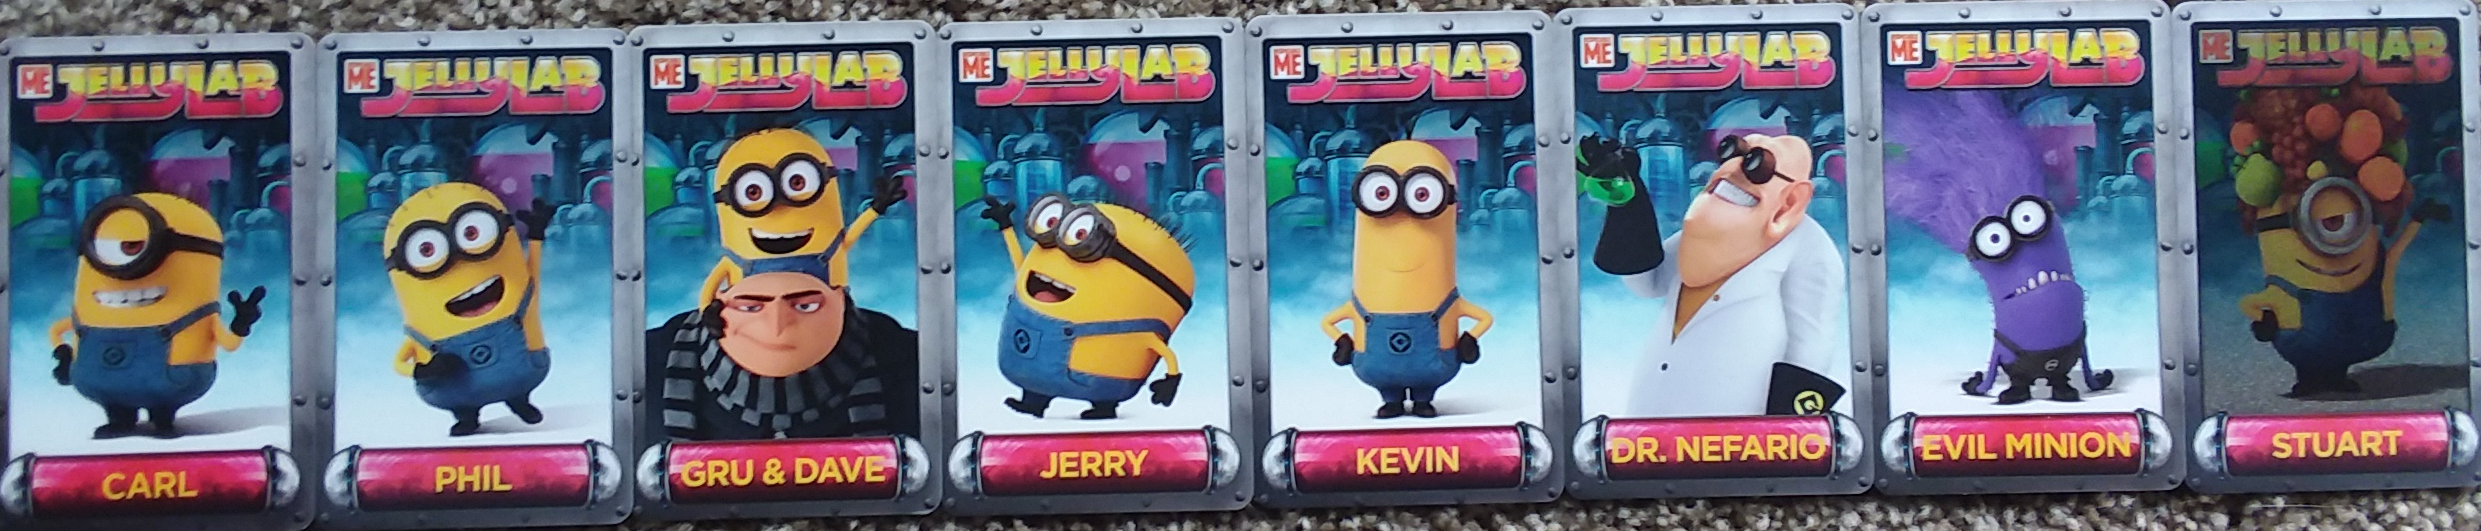 despicable me jelly lab arcade game cards